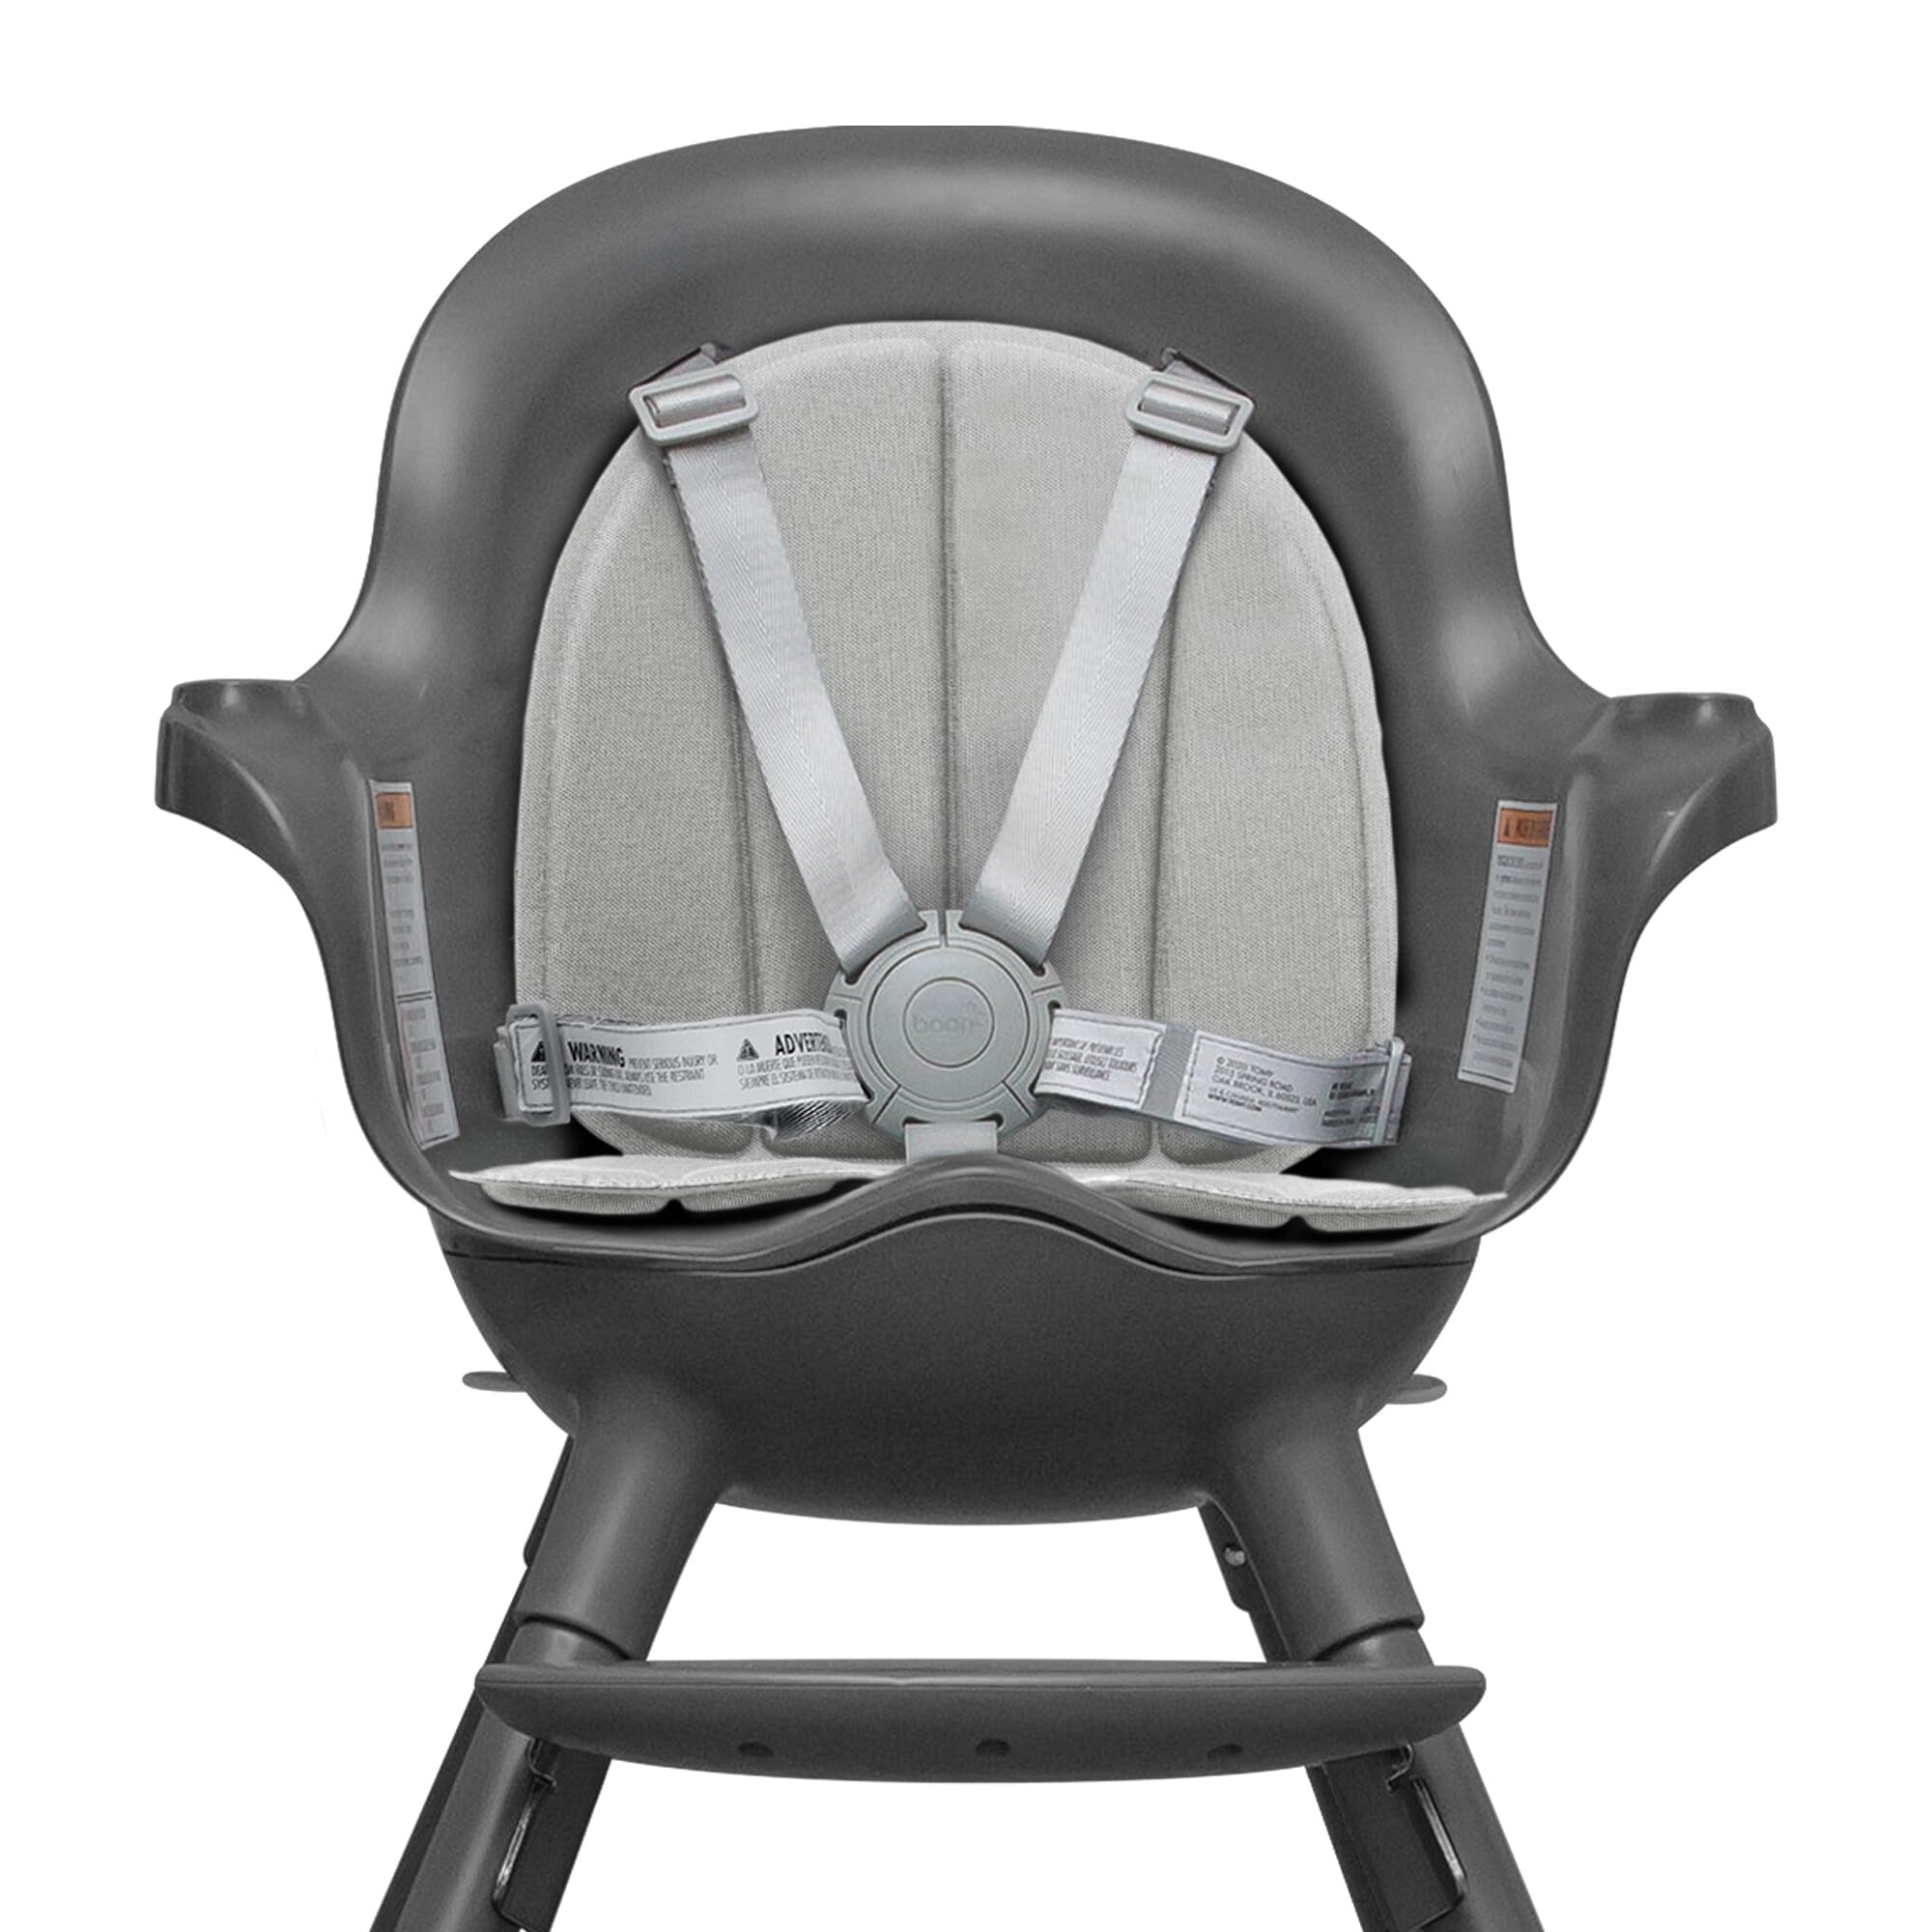 Boon Grub High Chair Cushion - Extra Machine Washable Booster Seat Pad Replacement - for Use with Grub Baby High Chair - Up to 50 Lbs. - Gray